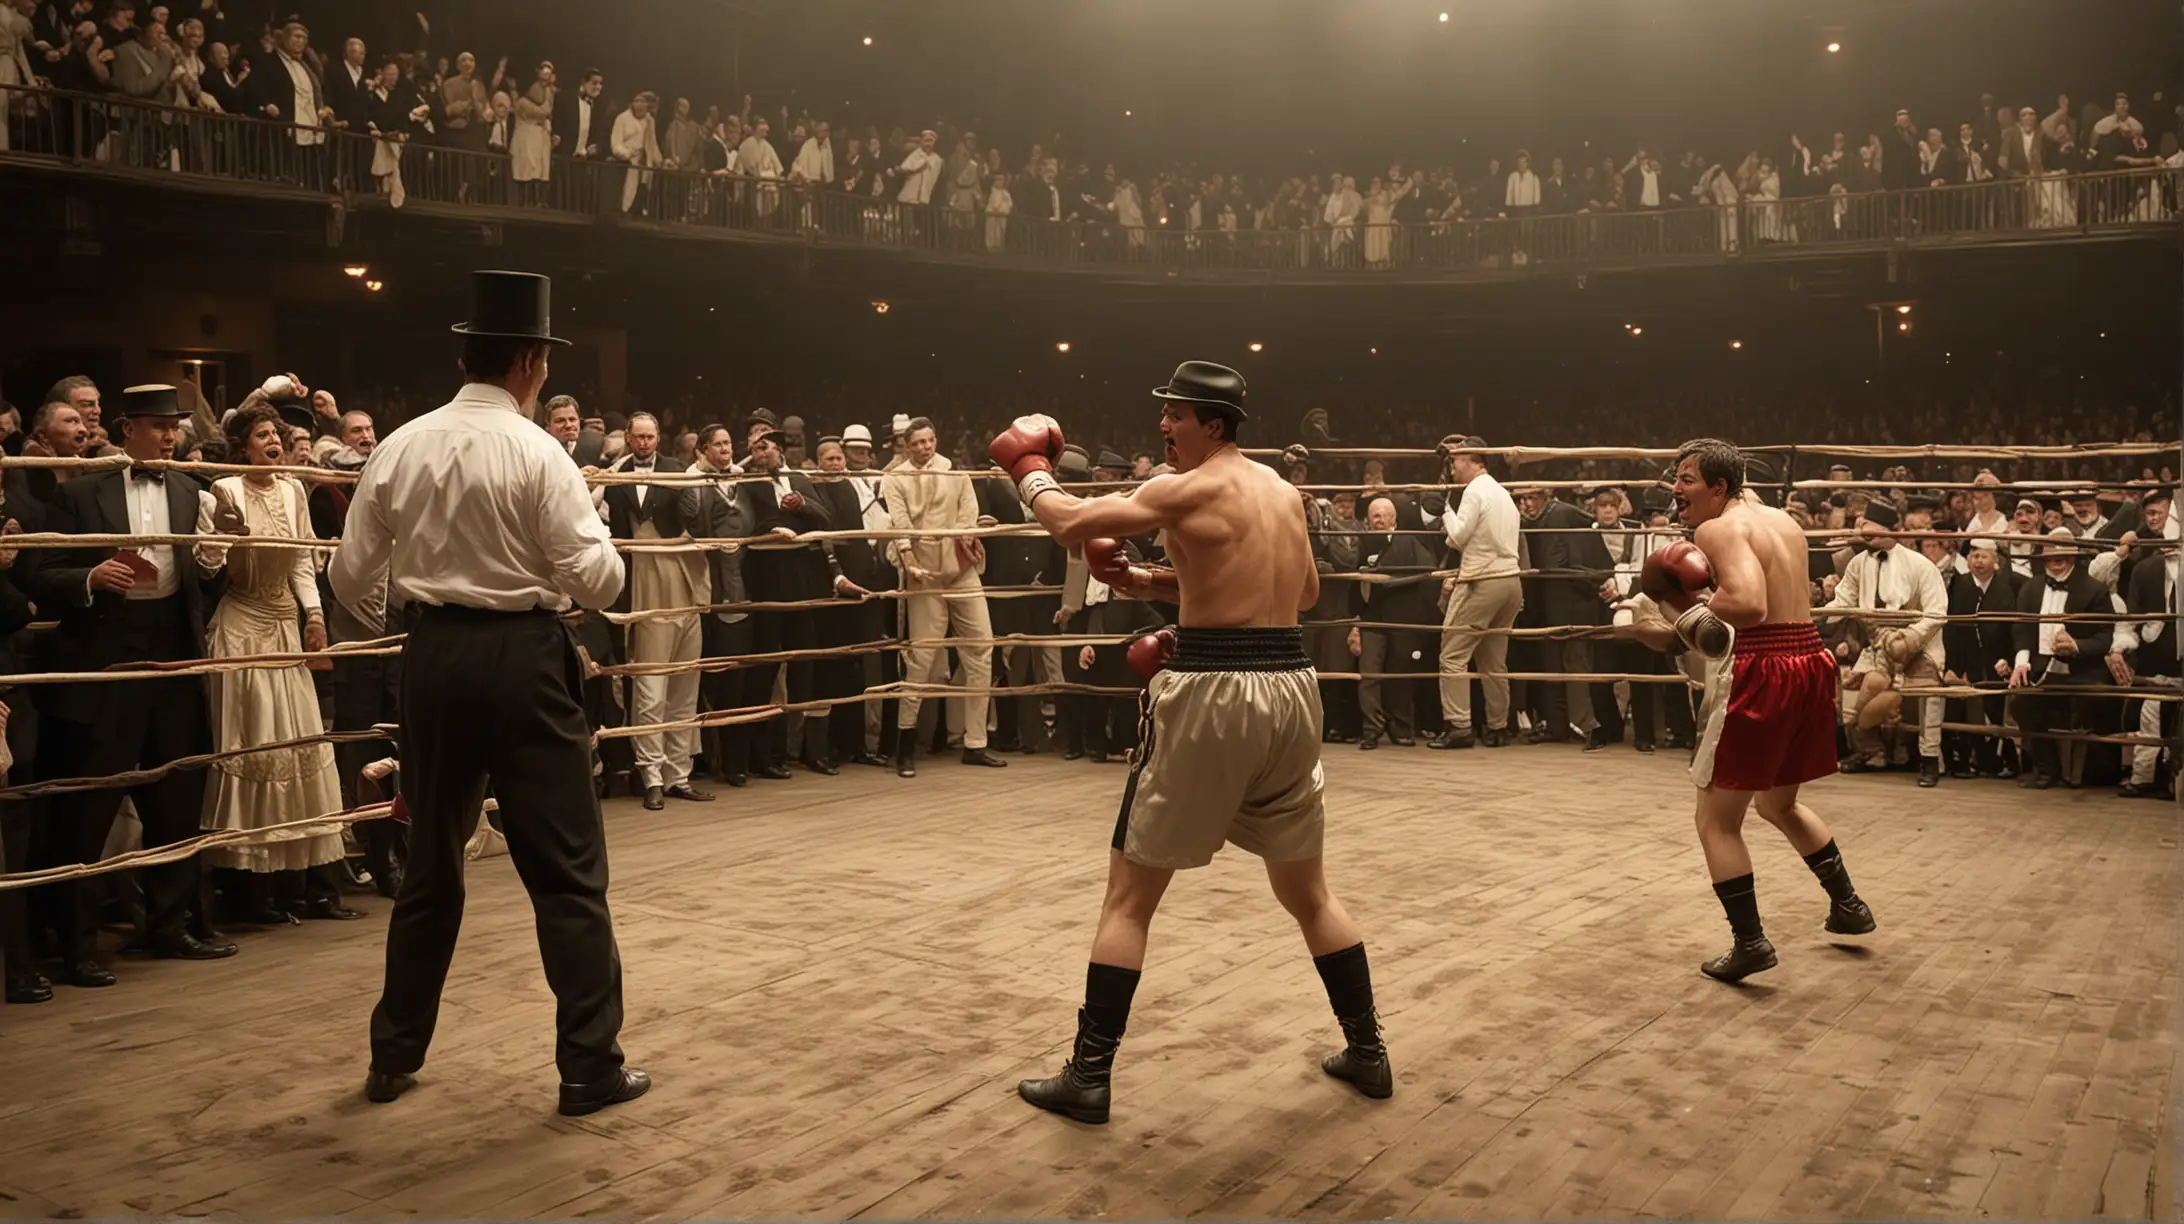 Victorianera Boxing Match Spectators Cheer on Pugilists in Ring